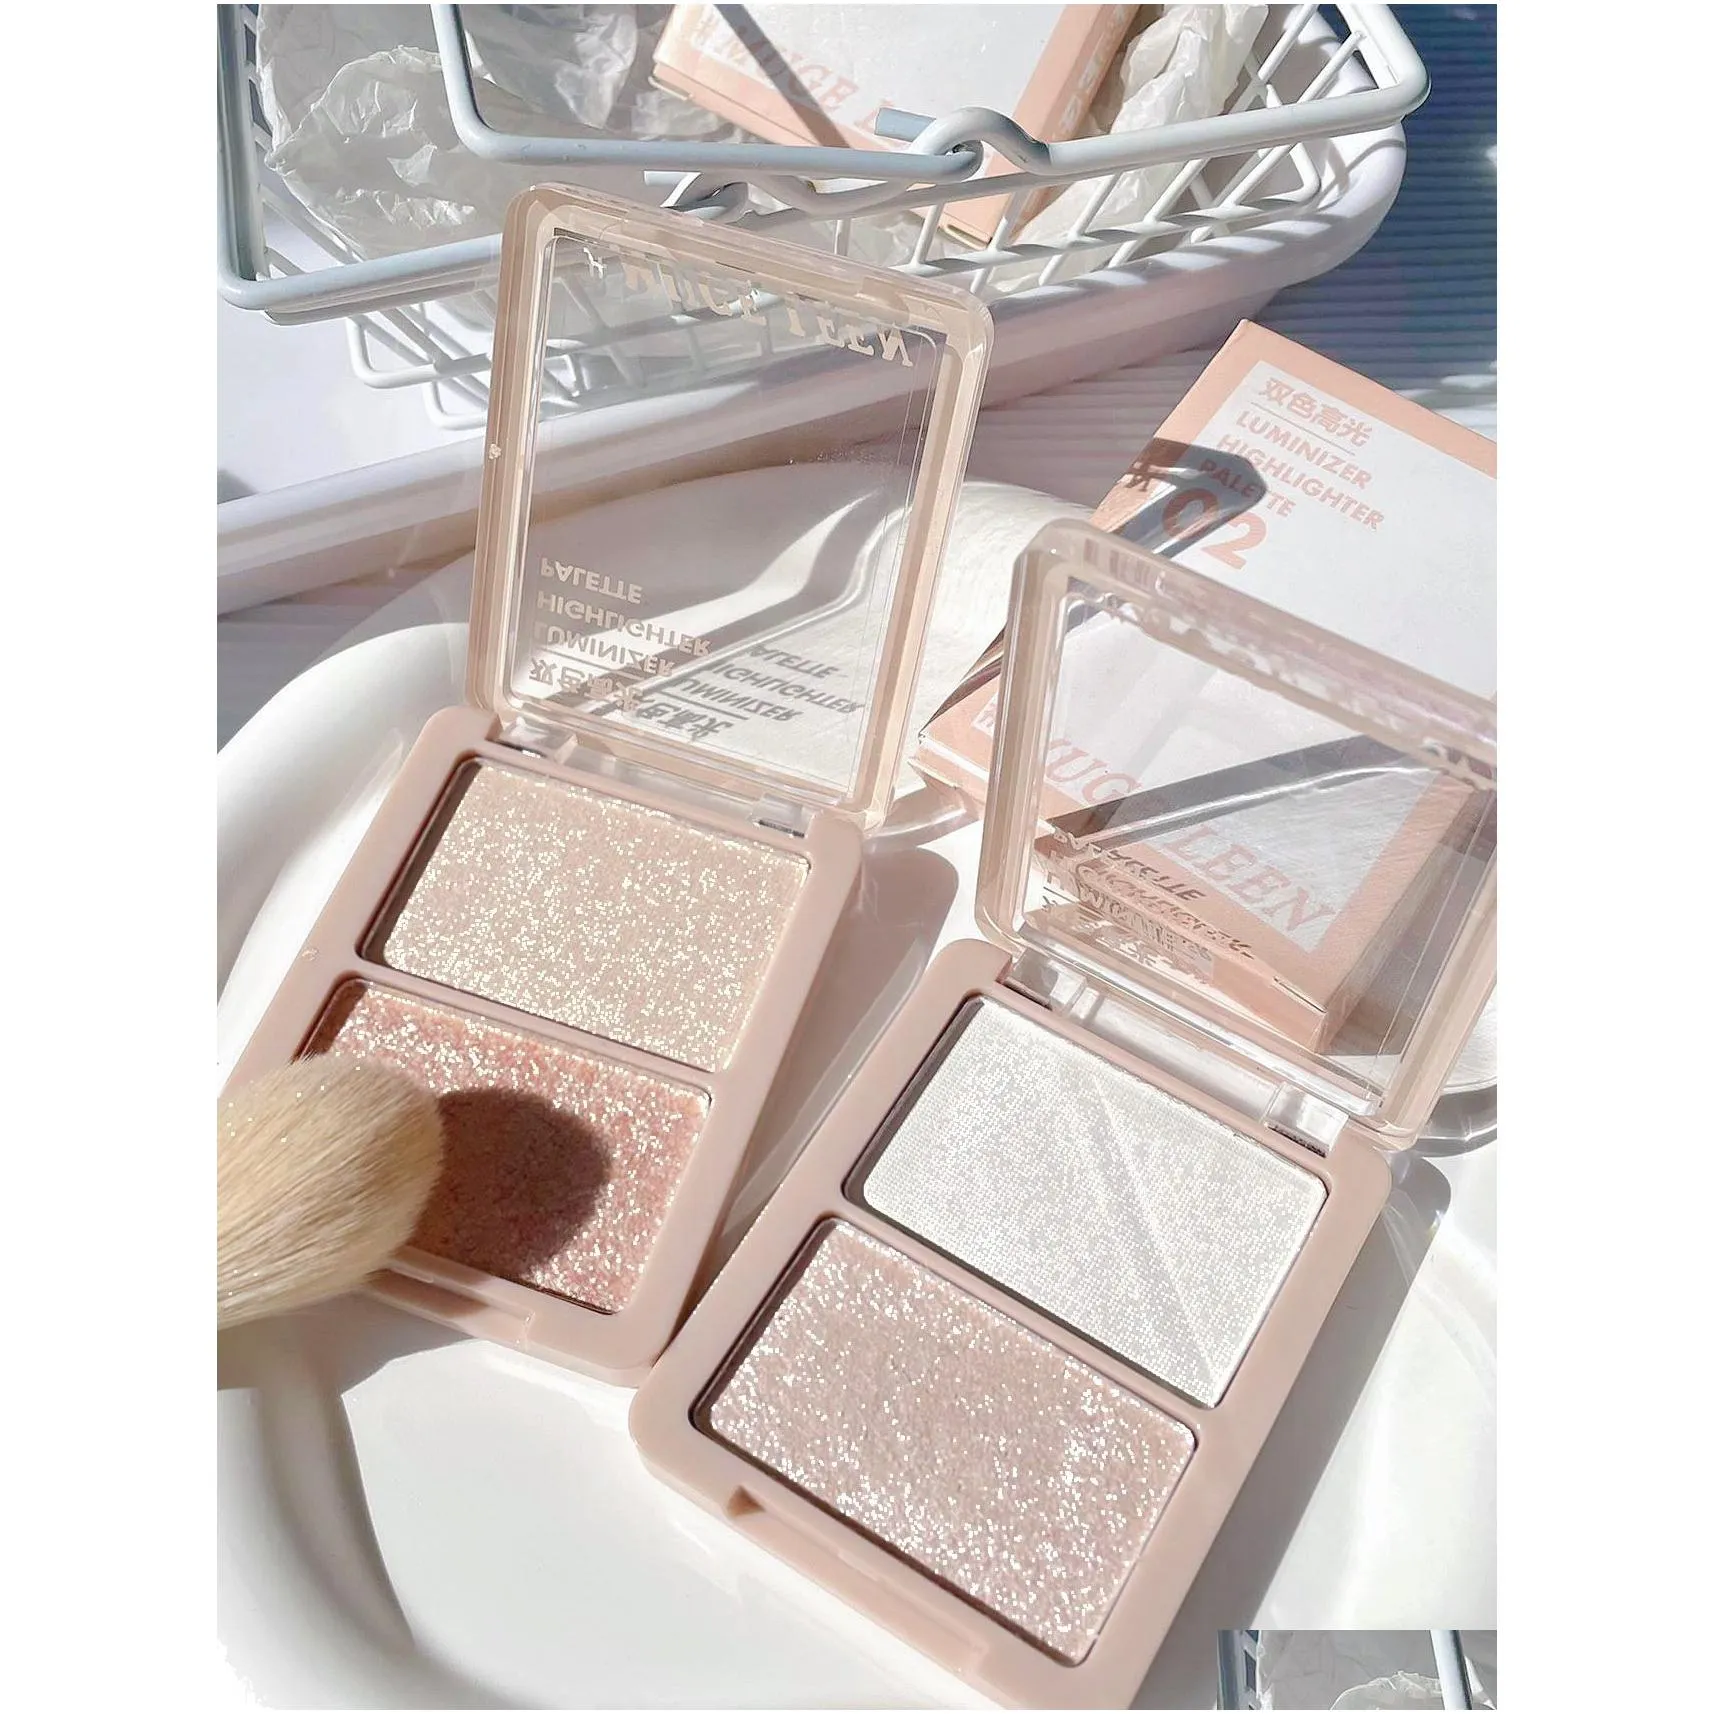 highlighters palette glitter mashed potatoes highlighter makeup gel face and body brighten natural contour shadow